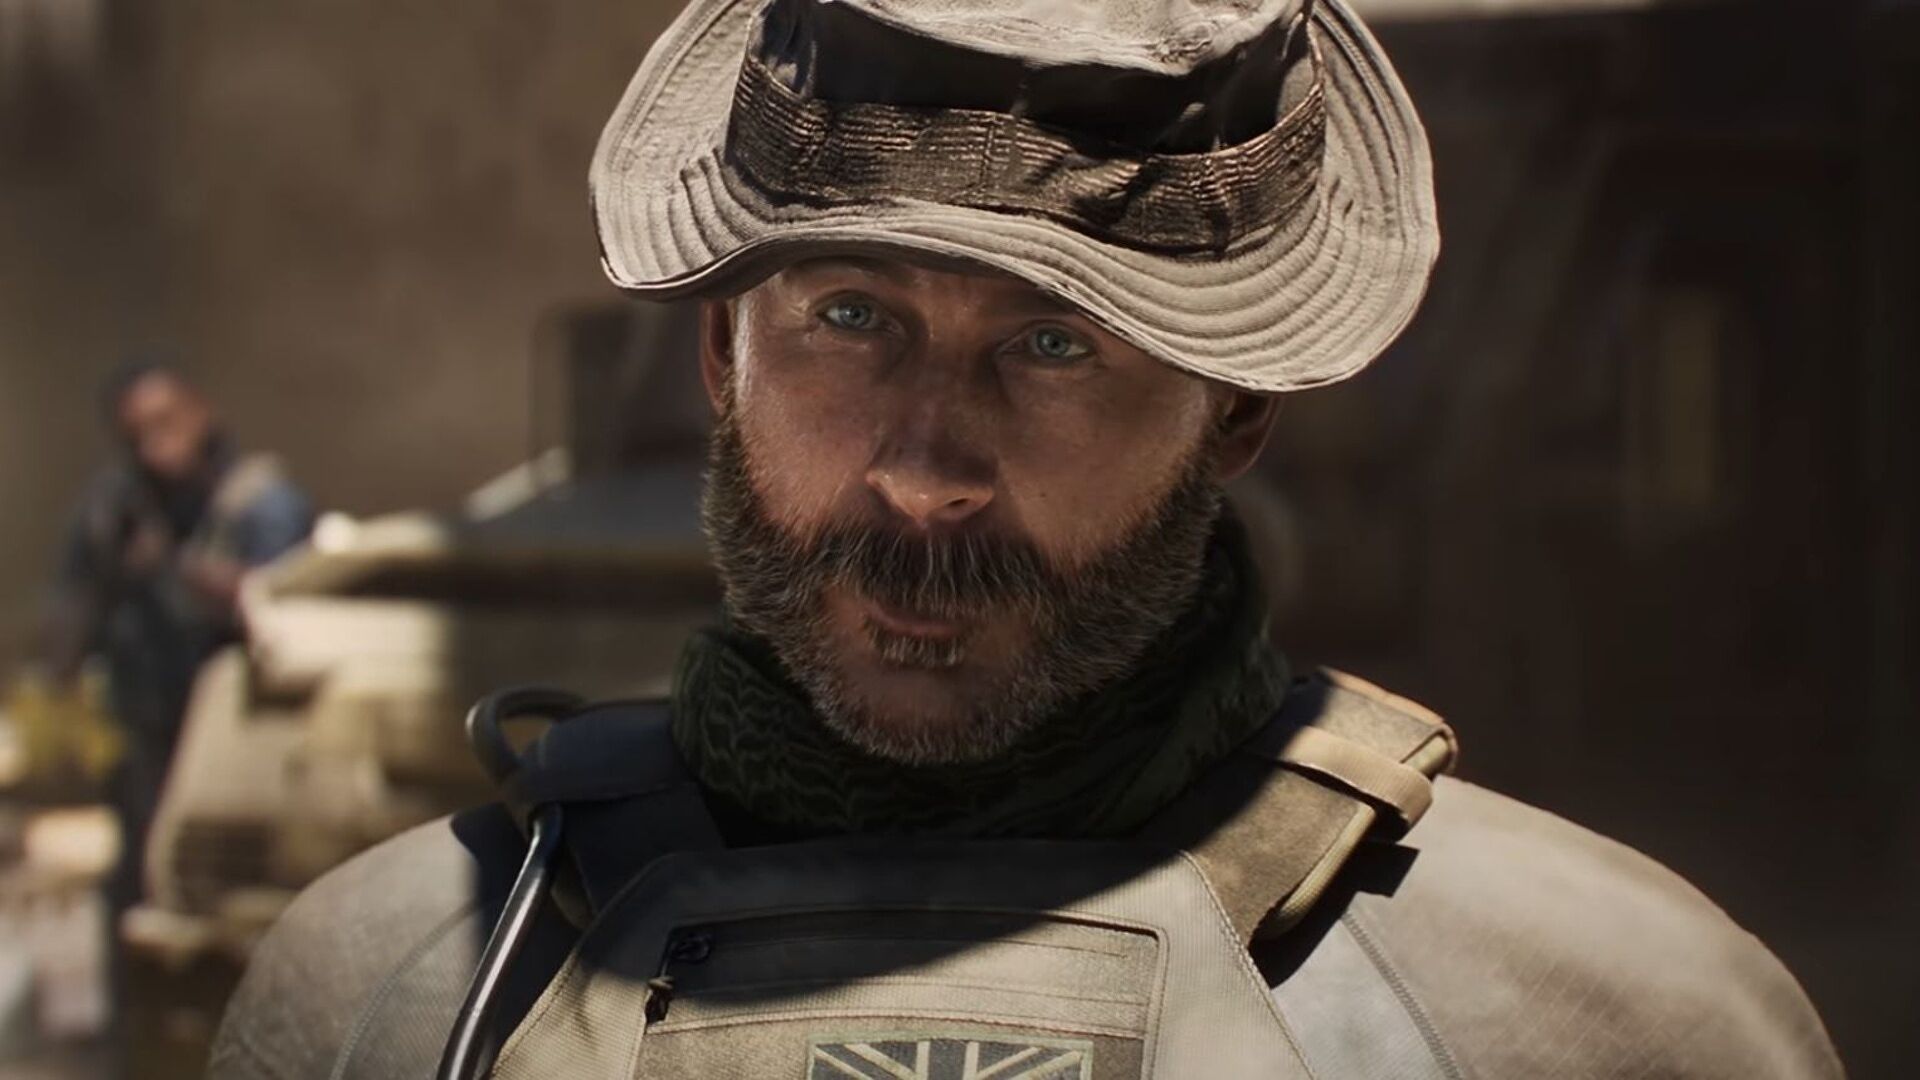 2023's Call Of Duty will be a "full premium release", whatever that means